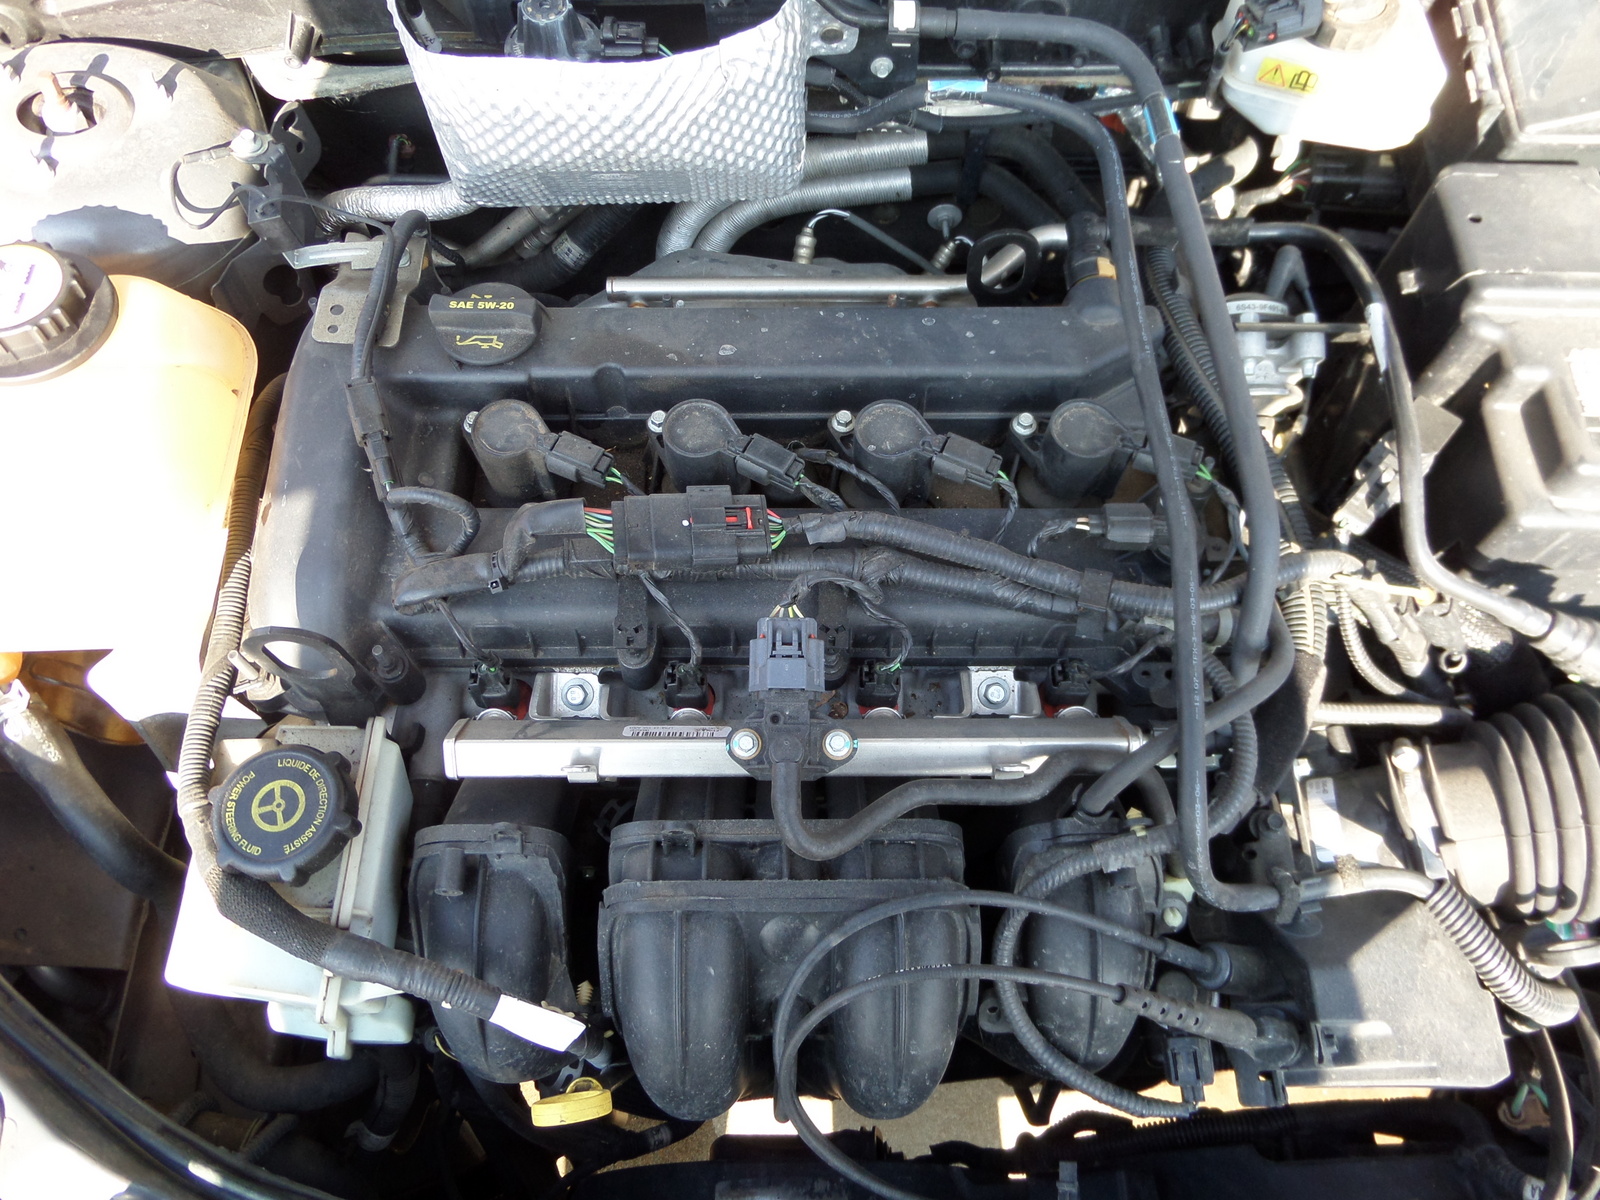 2007 Ford focus zx3 engine specs #9